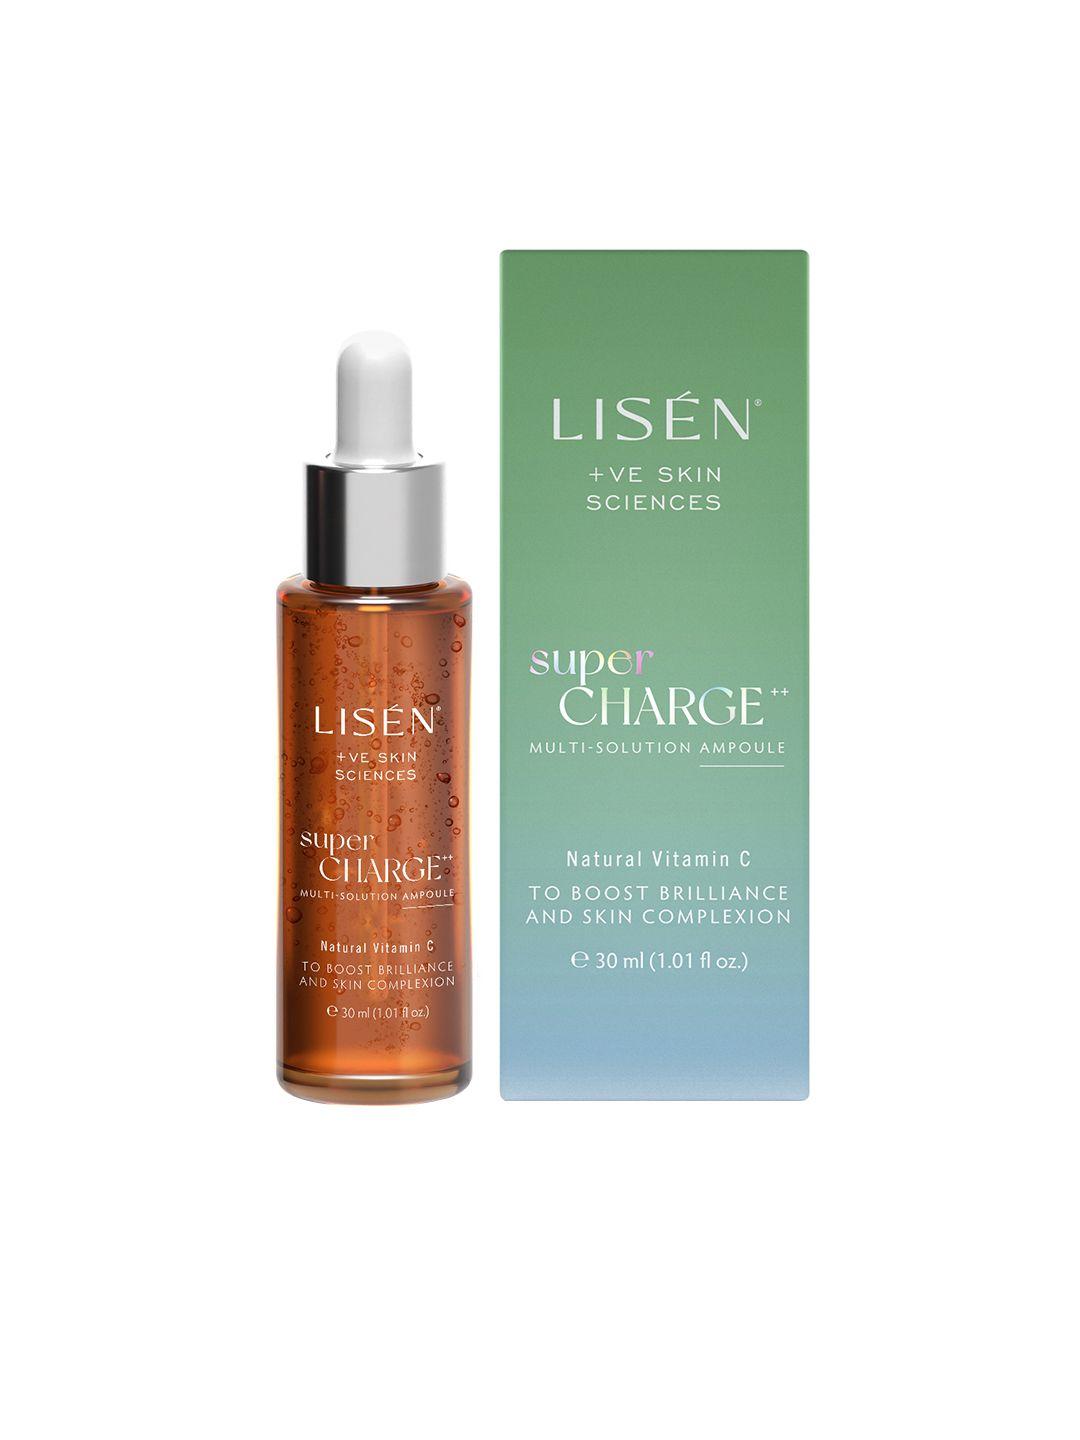 lisen supercharge ++ multi-solution ampoule with natural vitamin c highly stable - 30 ml